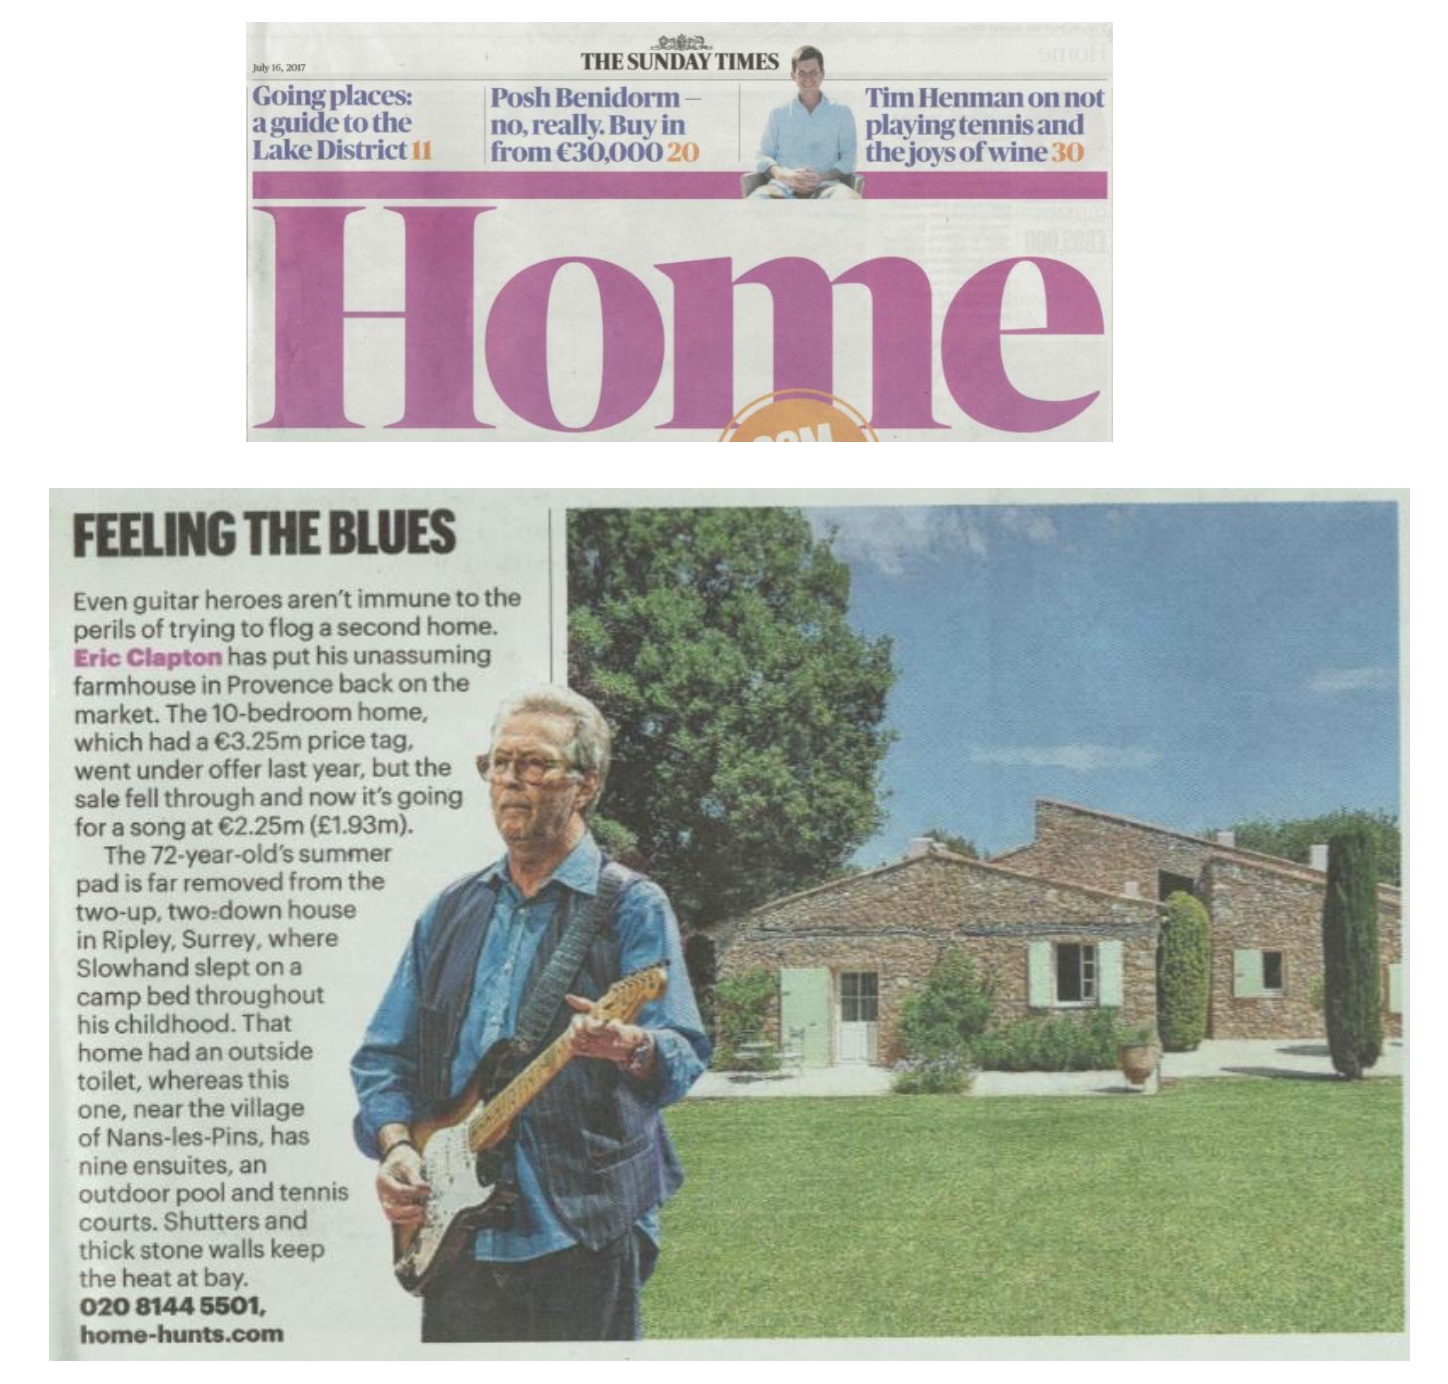 Sunday Times – Eric Clapton’s farmhouse in Provence